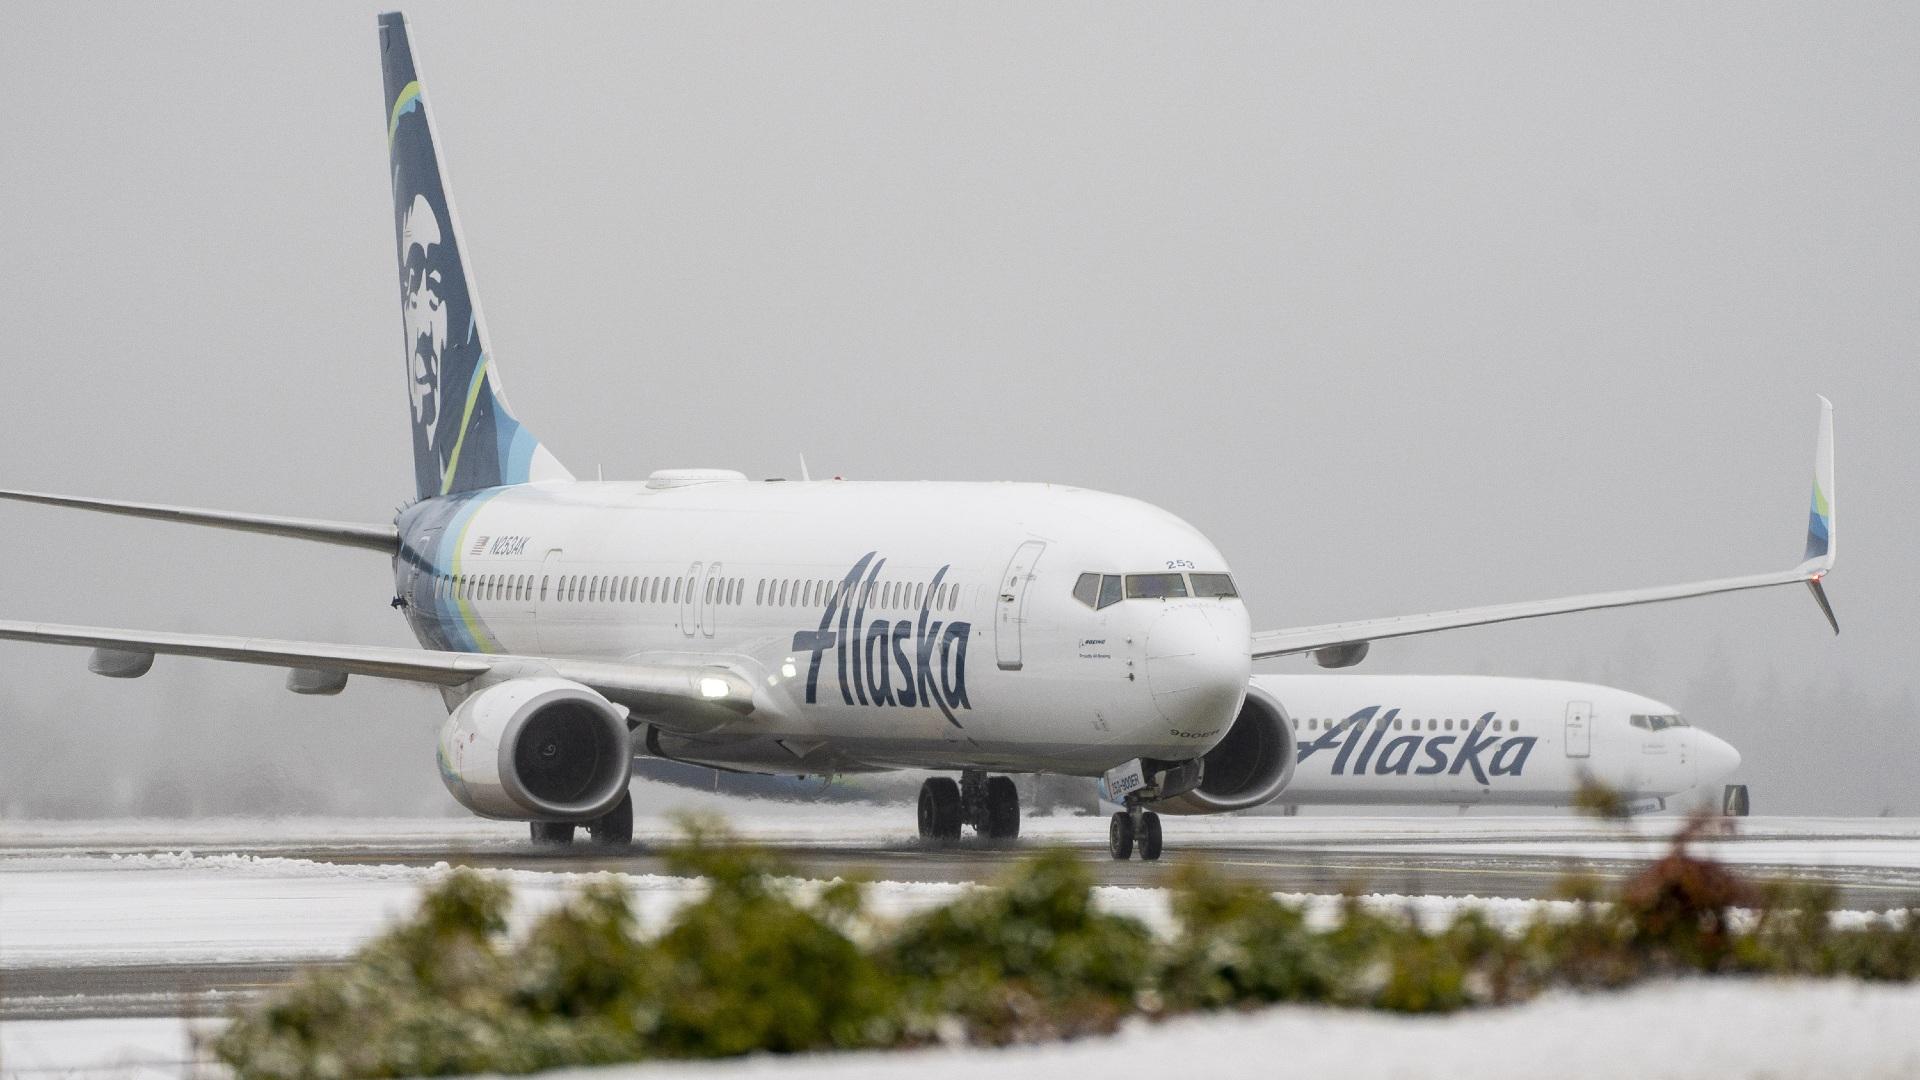 More than 1,000 flights have been cancelled across the United States, according to the flight tracking site FlightAware, as severe winter weather threatens holiday travel, and pictured, Alaska Airlines planes in Seattle, Washington, on Dec. 20. (David Ryder / Bloomberg / Getty Images)